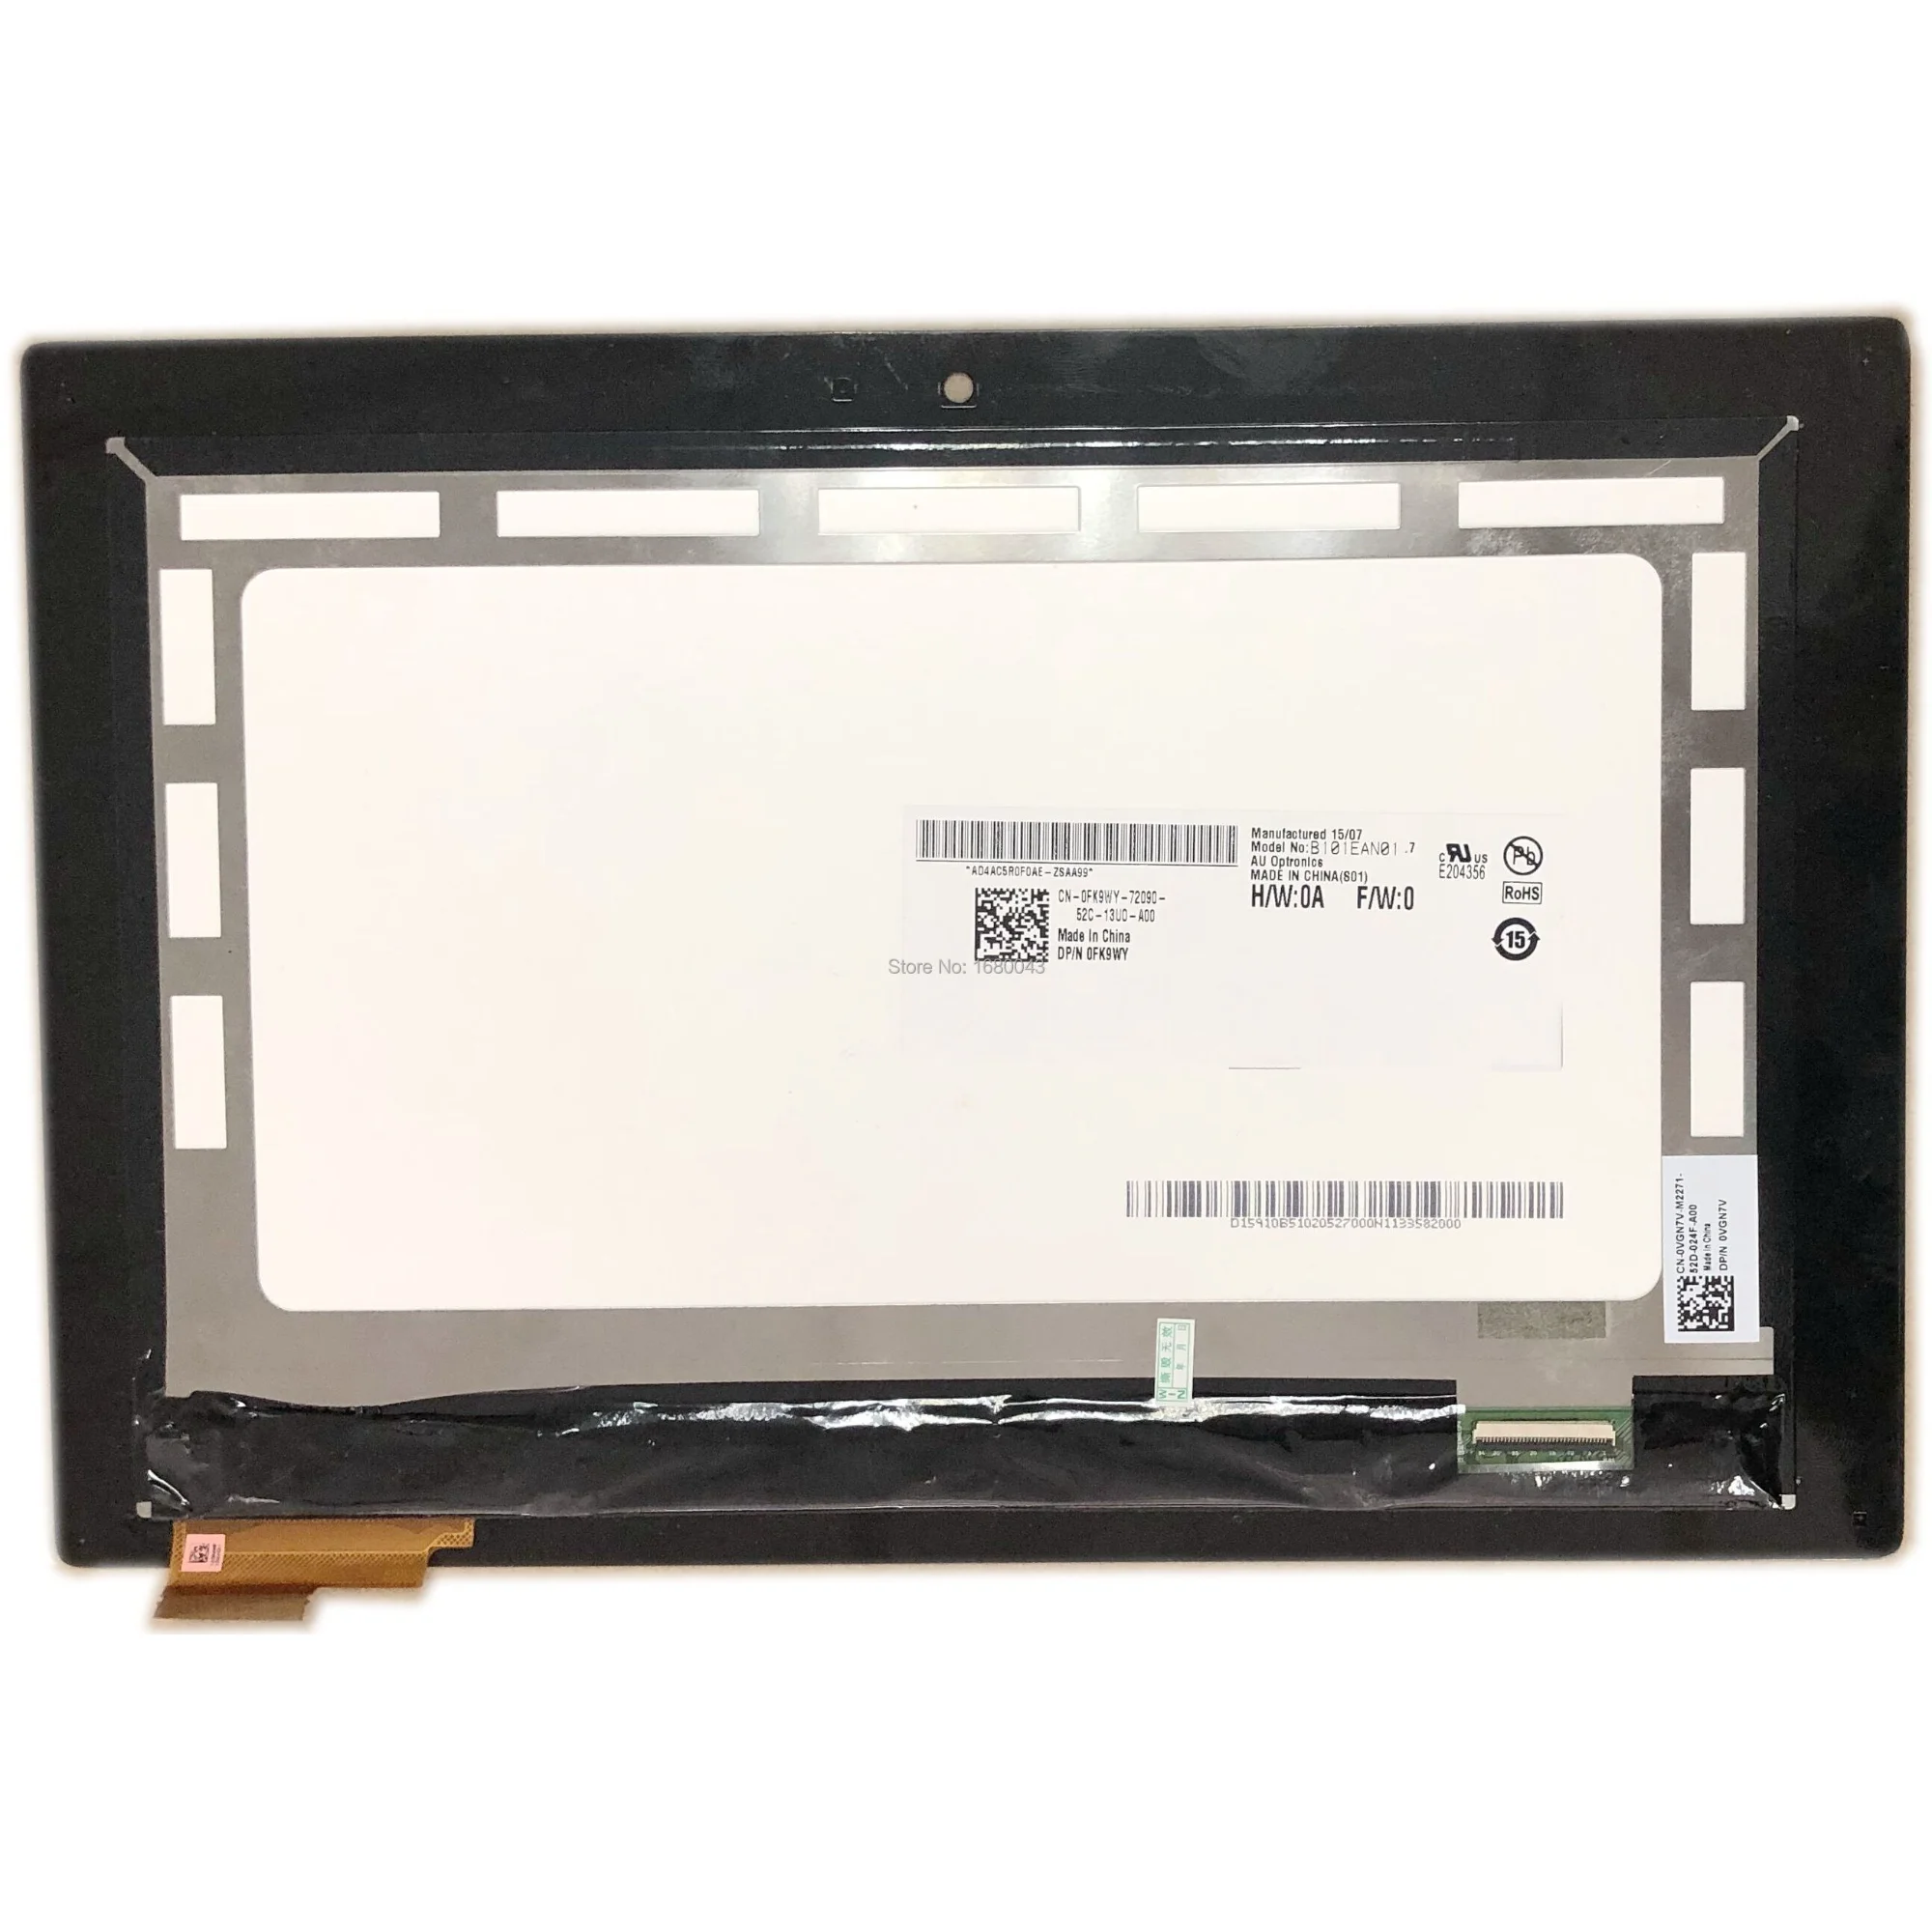 

B101EAN01.7 LCD LED Touch Screen Glass Digitizer Assembly For 10.1" Dell Venue 10 Pro 5055 5050 BLACK Color TOM10069 V1.1